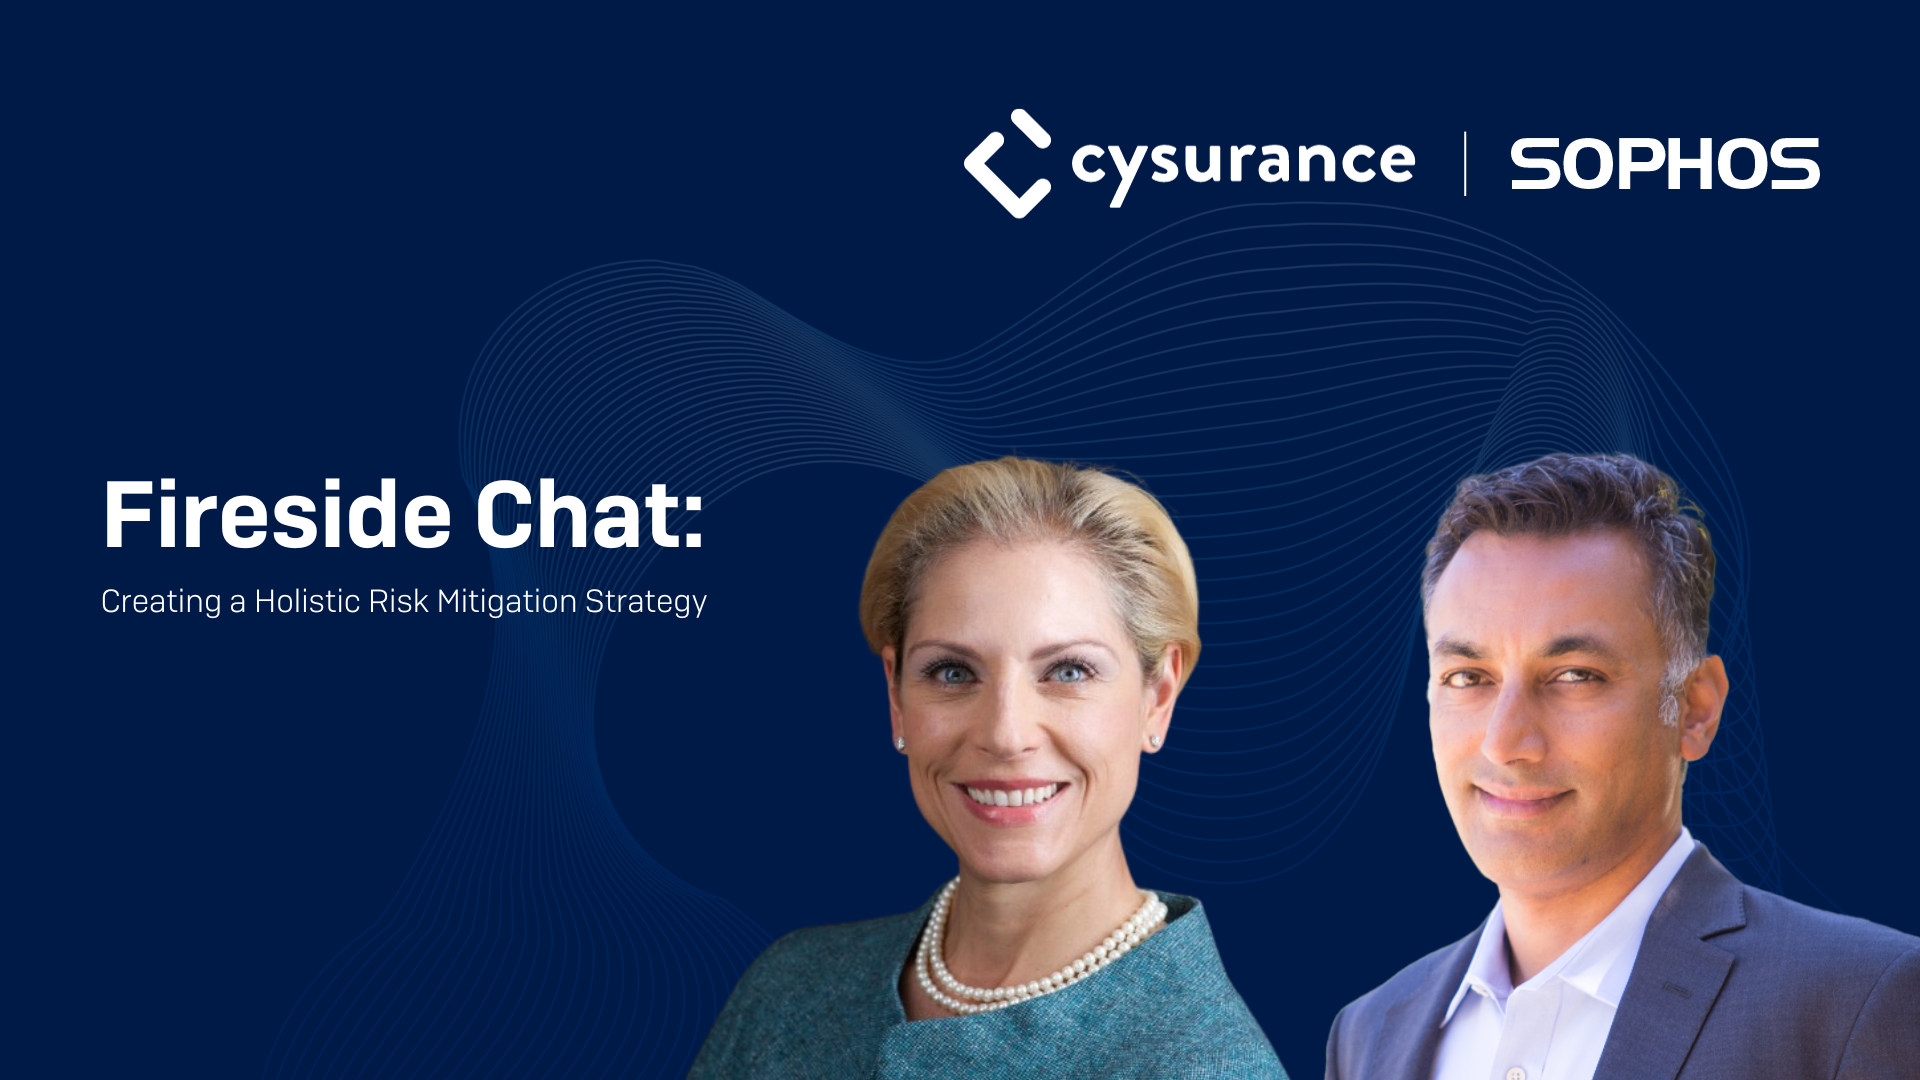 Fireside Chat: Creating a Holistic Risk Mitigation Strategy